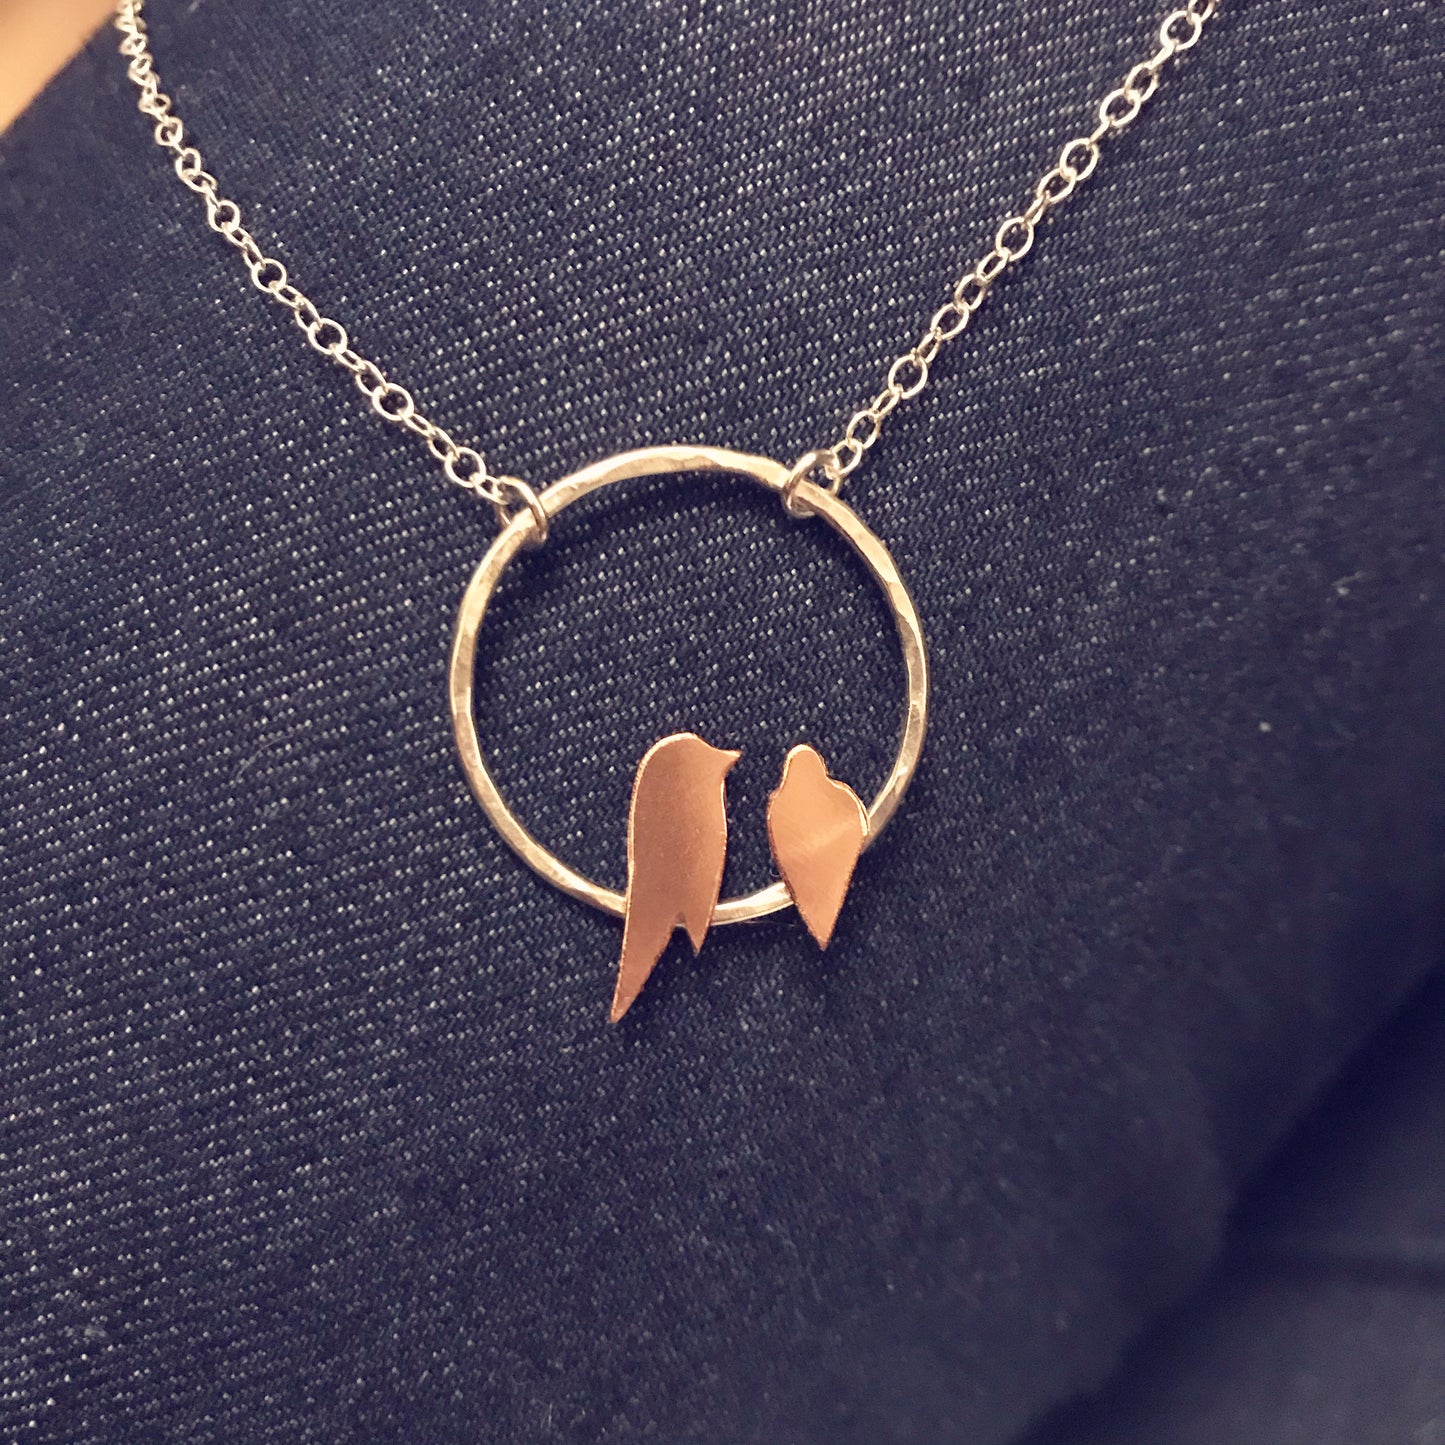 Two copper birds necklace